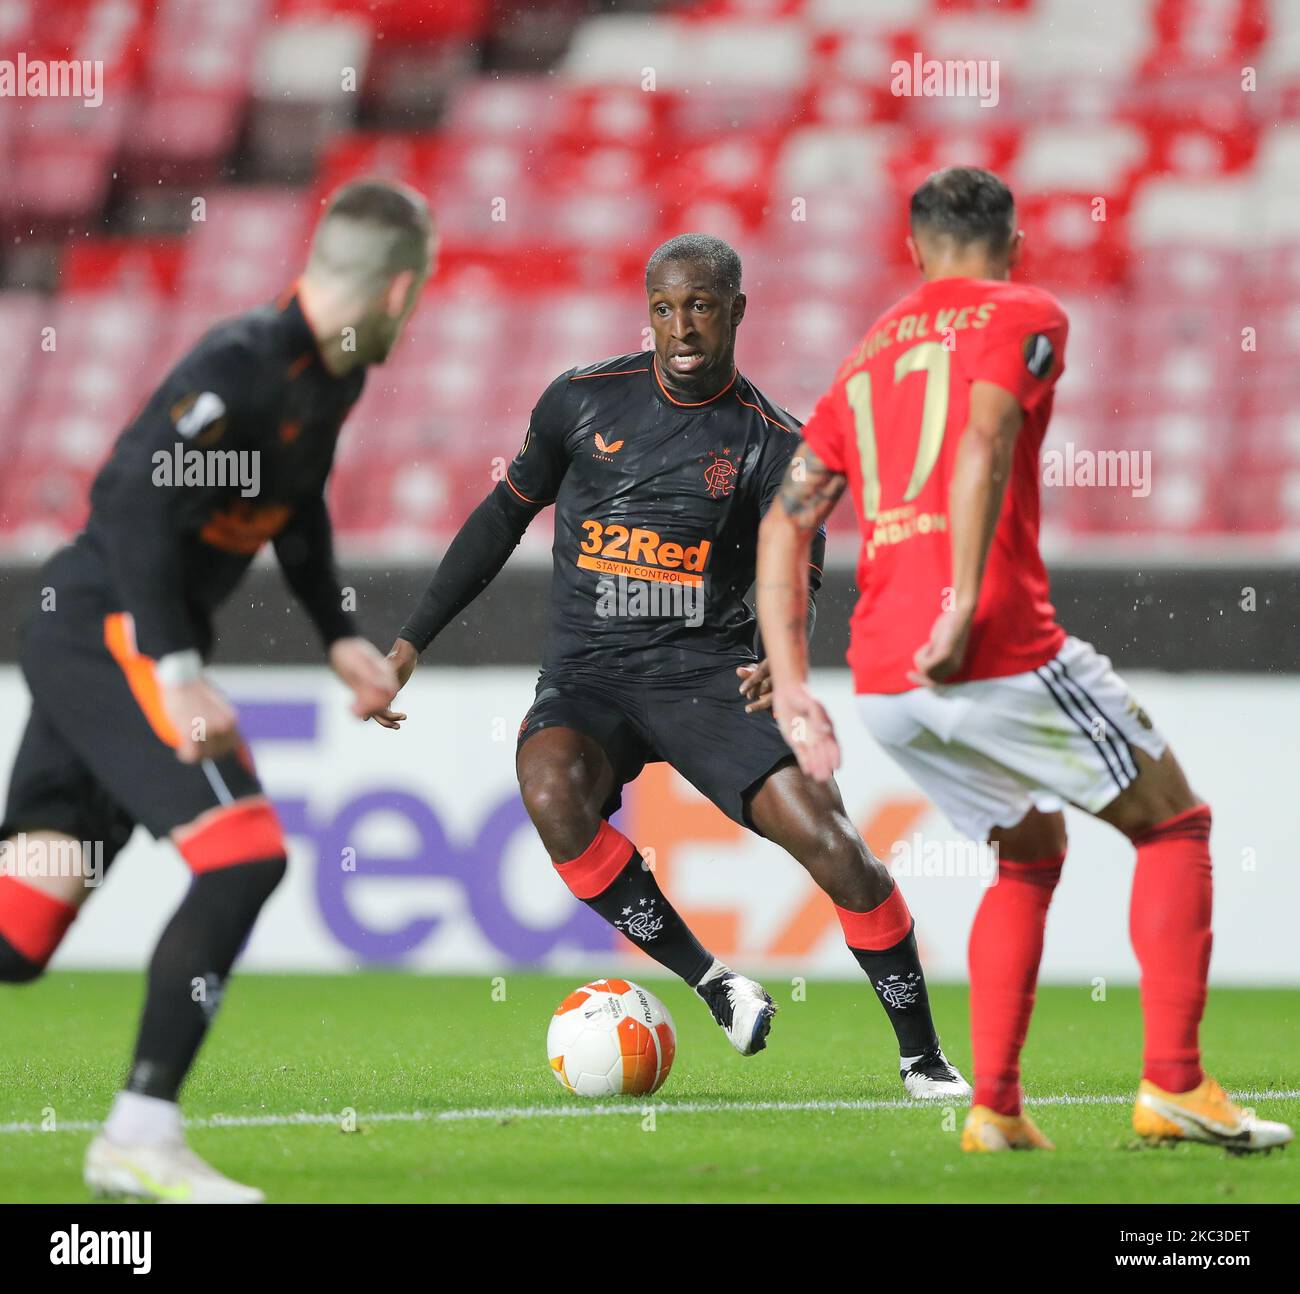 Glen Kamara of Rangers FC in action during the UEFA Europa League Group D stage match between SL Benfica and Rangers FC at Estadio da Luz on November 5, 2020 in Lisbon, Portugal. (Photo by Paulo Nascimento/NurPhoto) Stock Photo